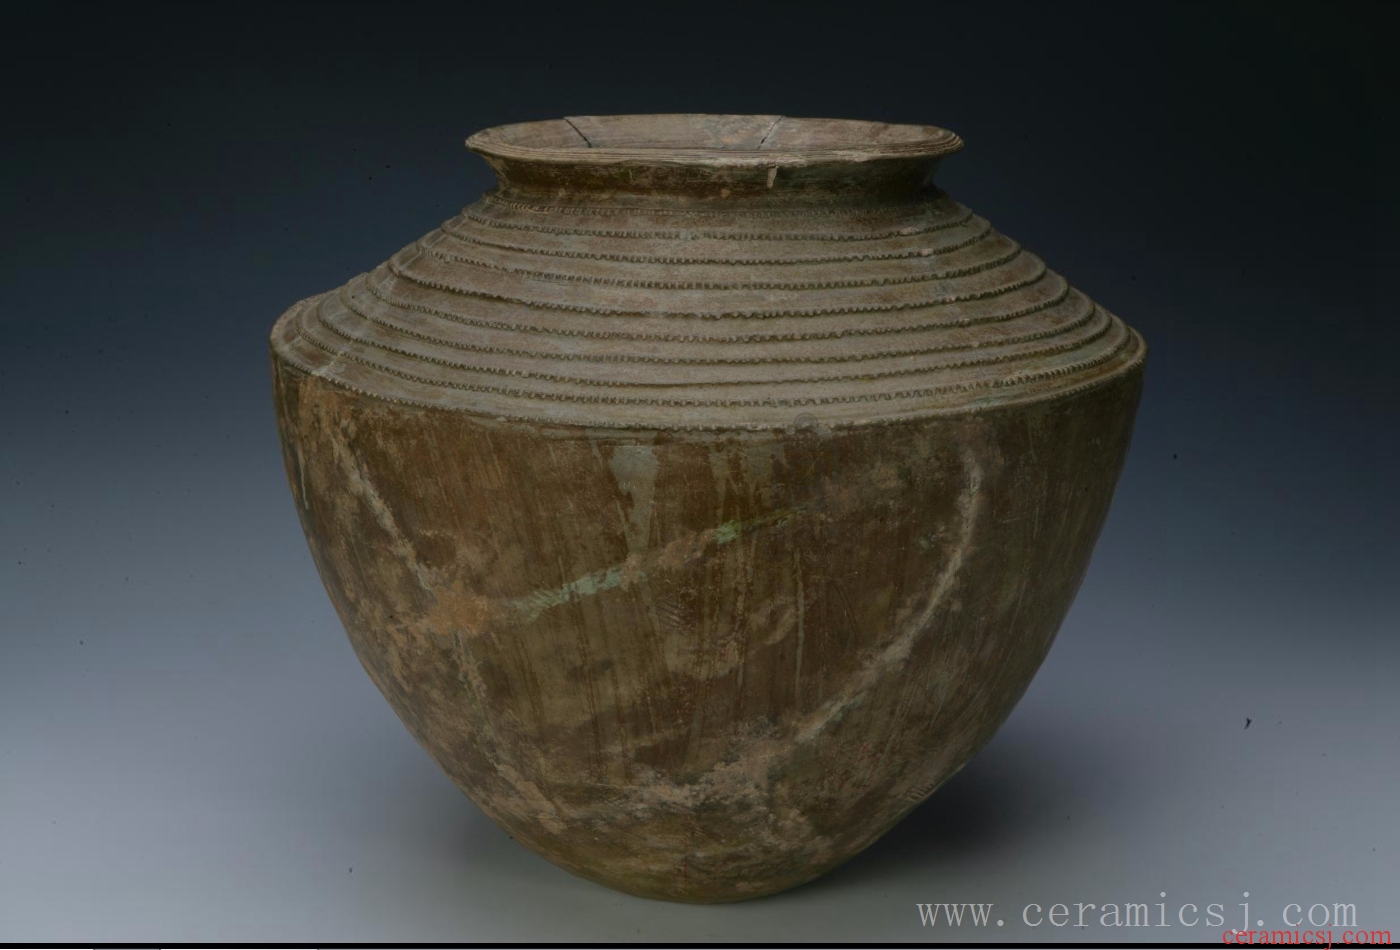 Period: Shang dynasty (ca. 1600-1028 BCE)  Glazetype: proto-porcelain  Date: undated 